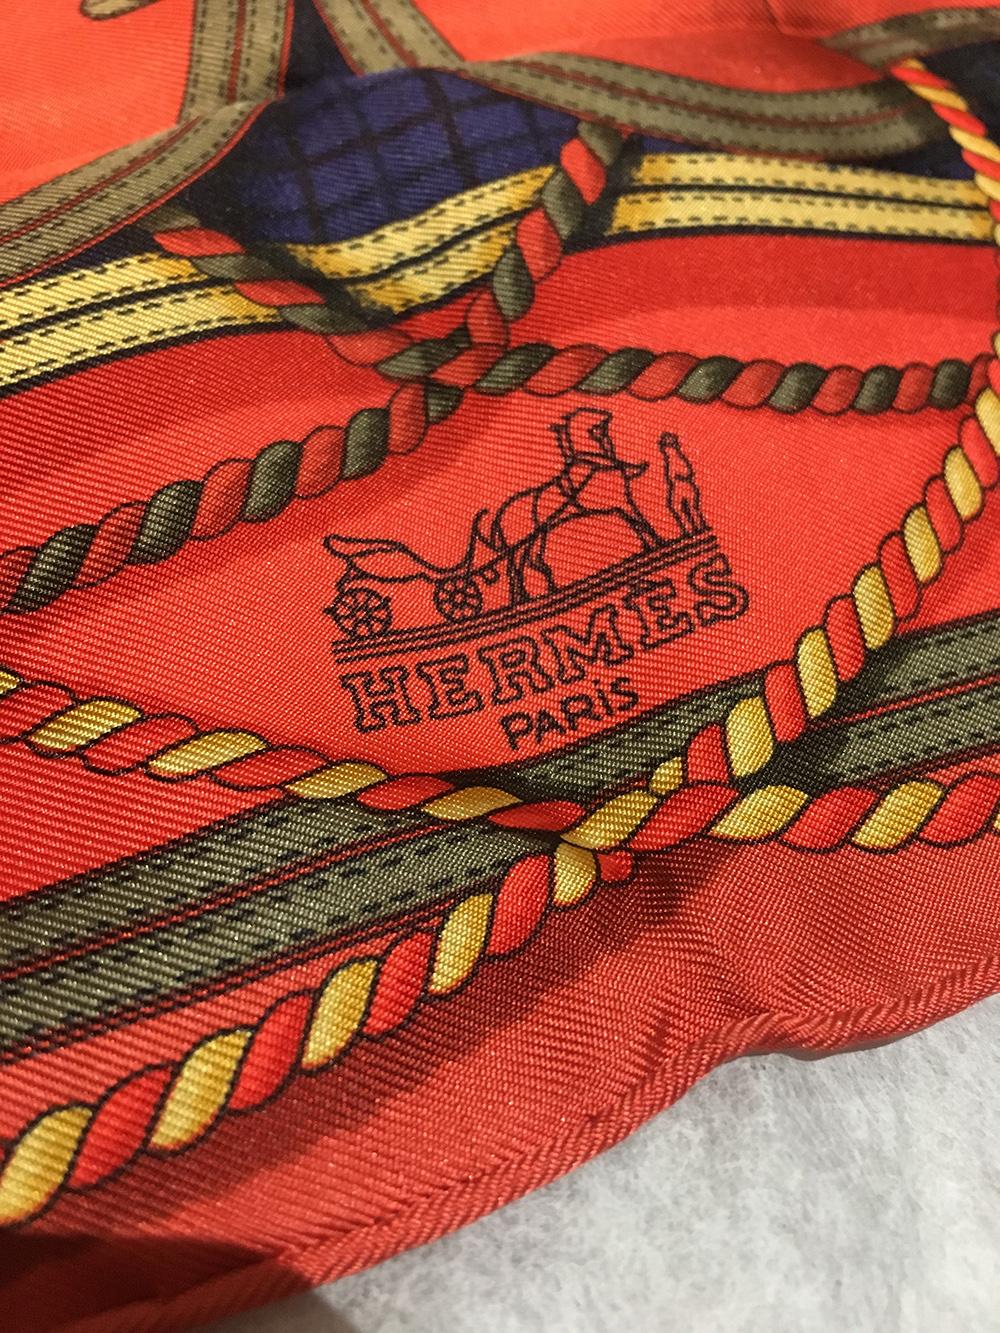 BEAUTIFUL Vintage Hermes Grand Tenues silk pocket square in excellent condition. Original silk screen design c1985 by Henri d'Origny features a regal ribbon and crown design over an orange background surrounded by navy and gold accents. 100% silk,